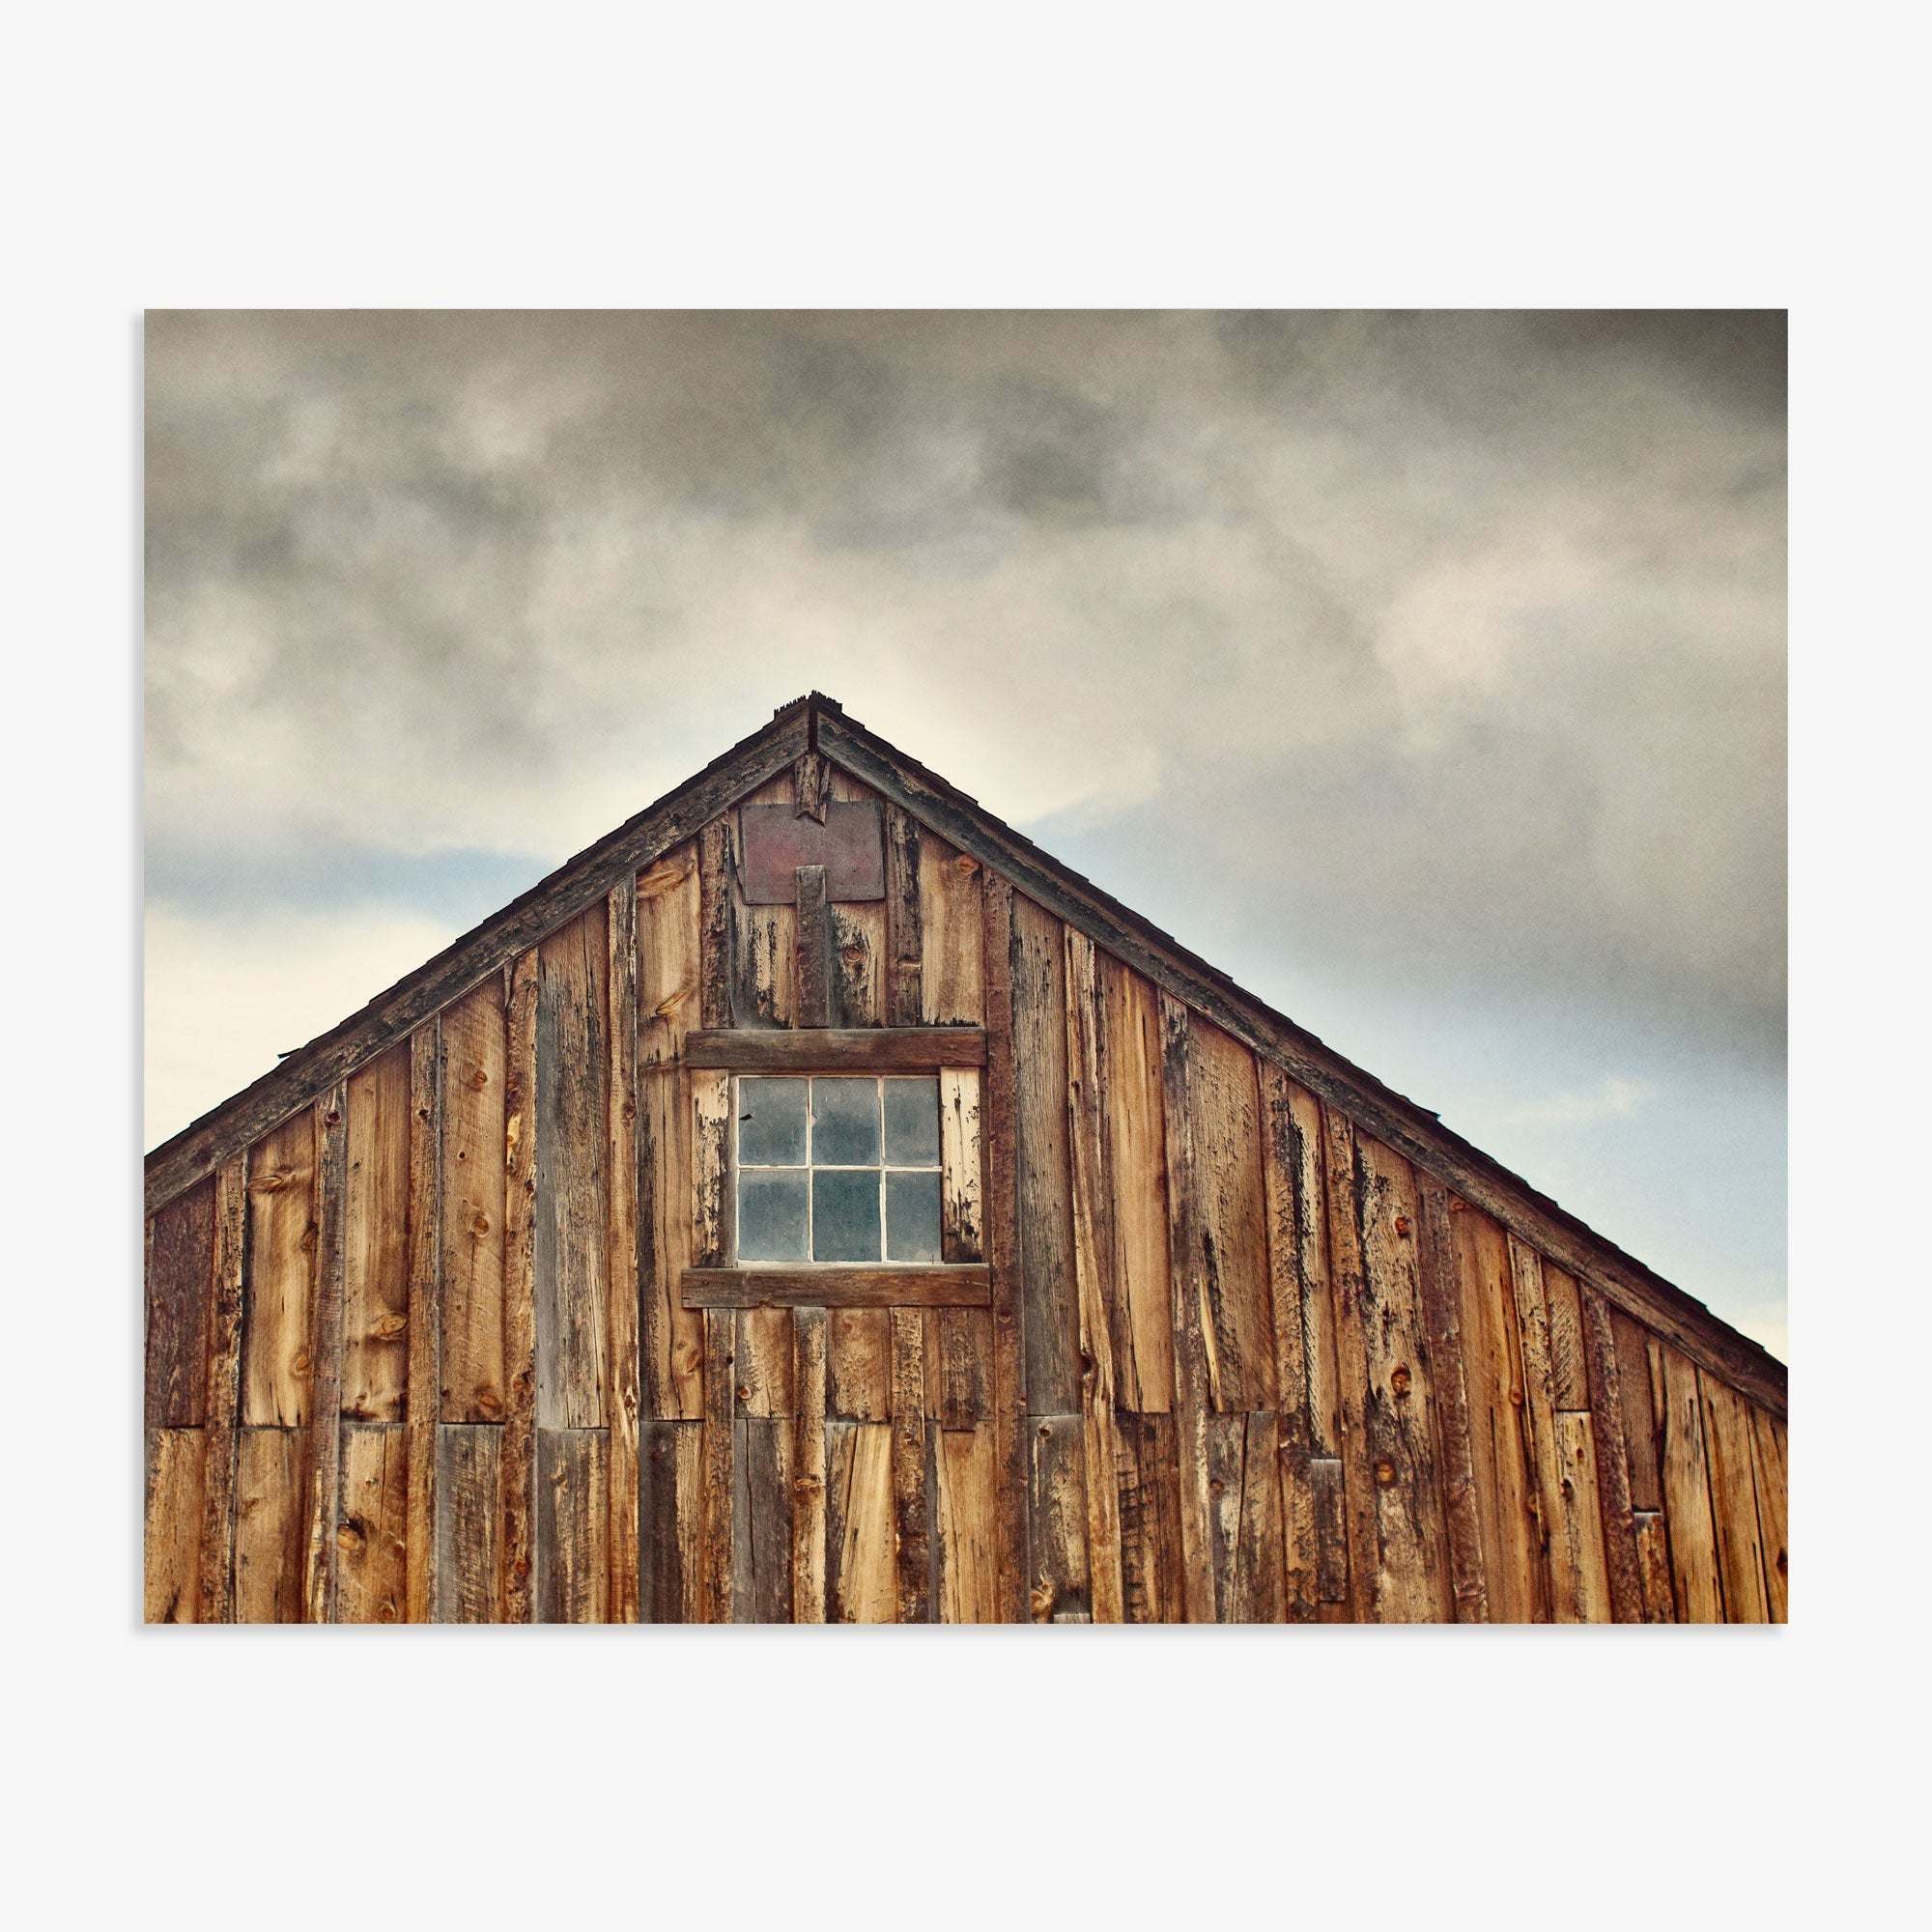 Offley Green&#39;s Farmhouse Rustic Print, &#39;Old Barn at Bodie&#39;, with weathered planks and a single window under a cloudy sky. The building&#39;s peak features intricate detailing against the backdrop of the Sierra Nevada mountains.